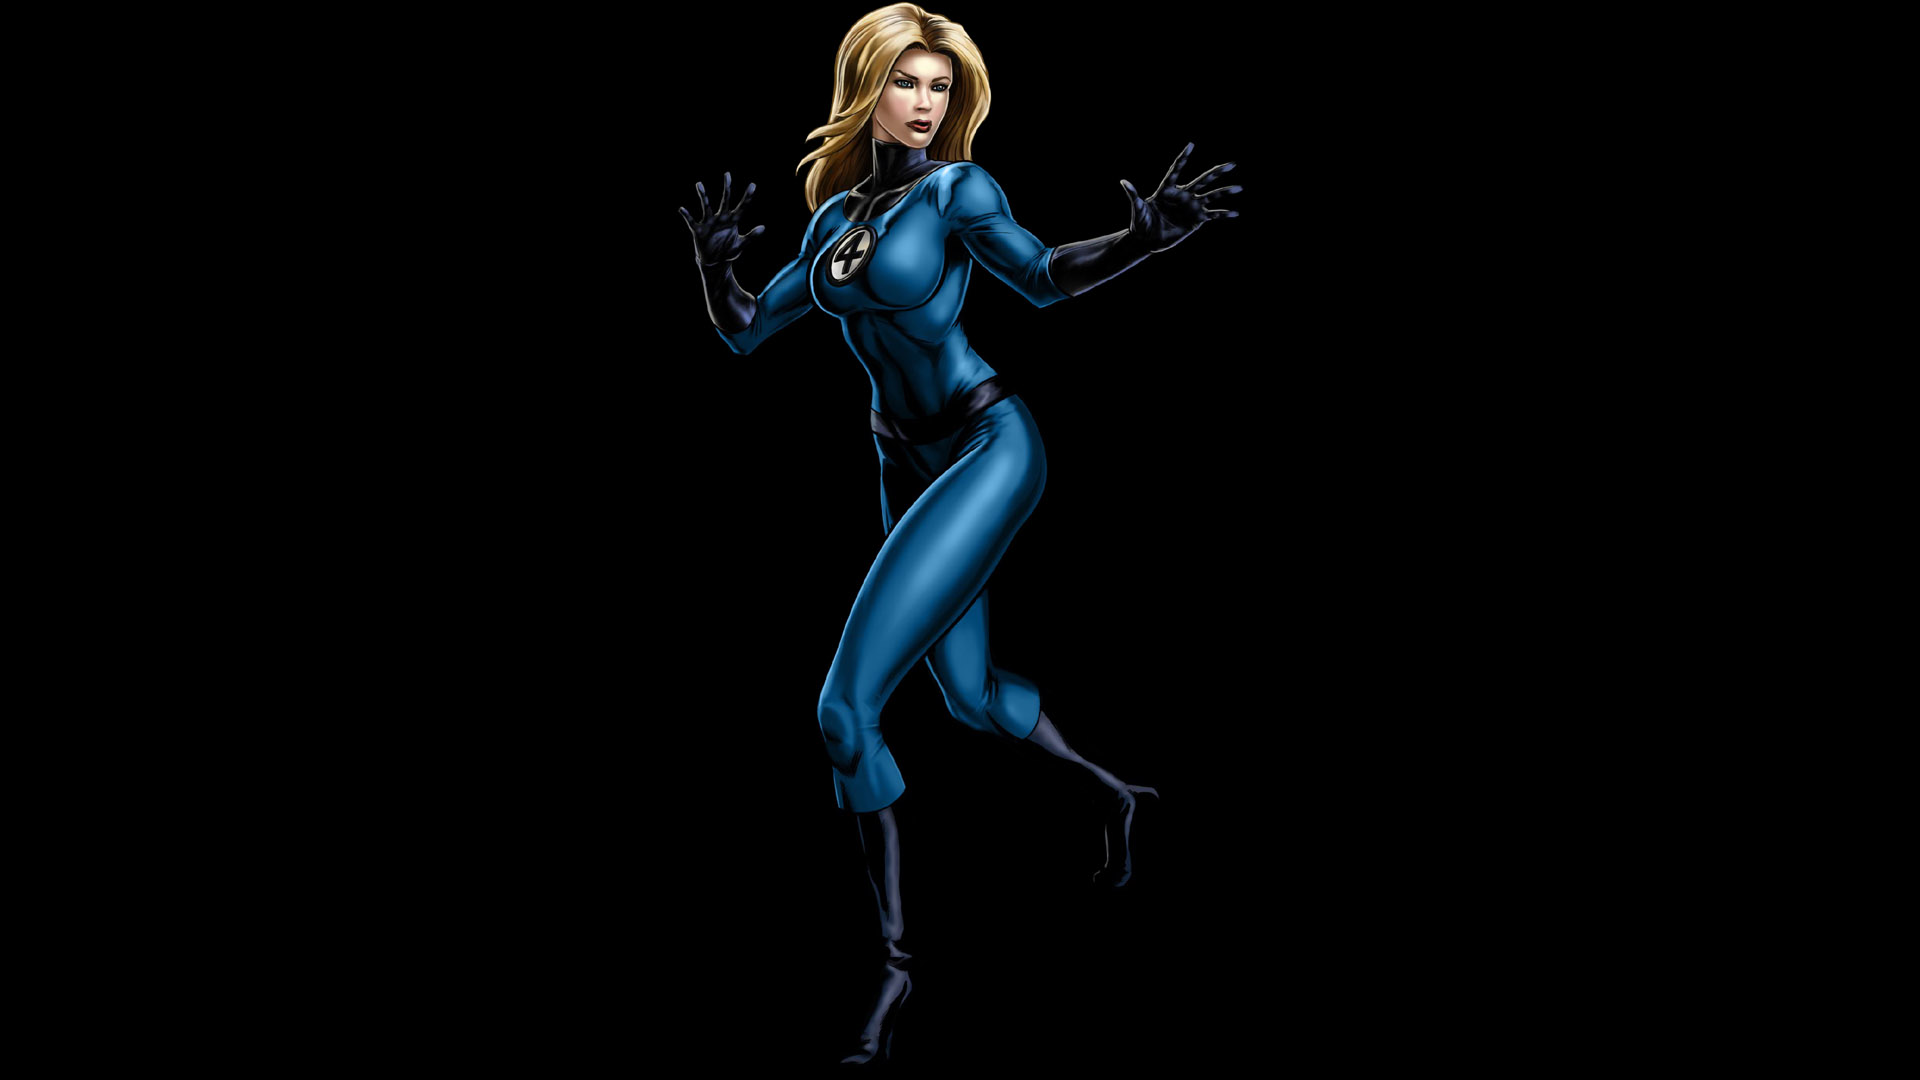 Invisible Woman Wallpapers